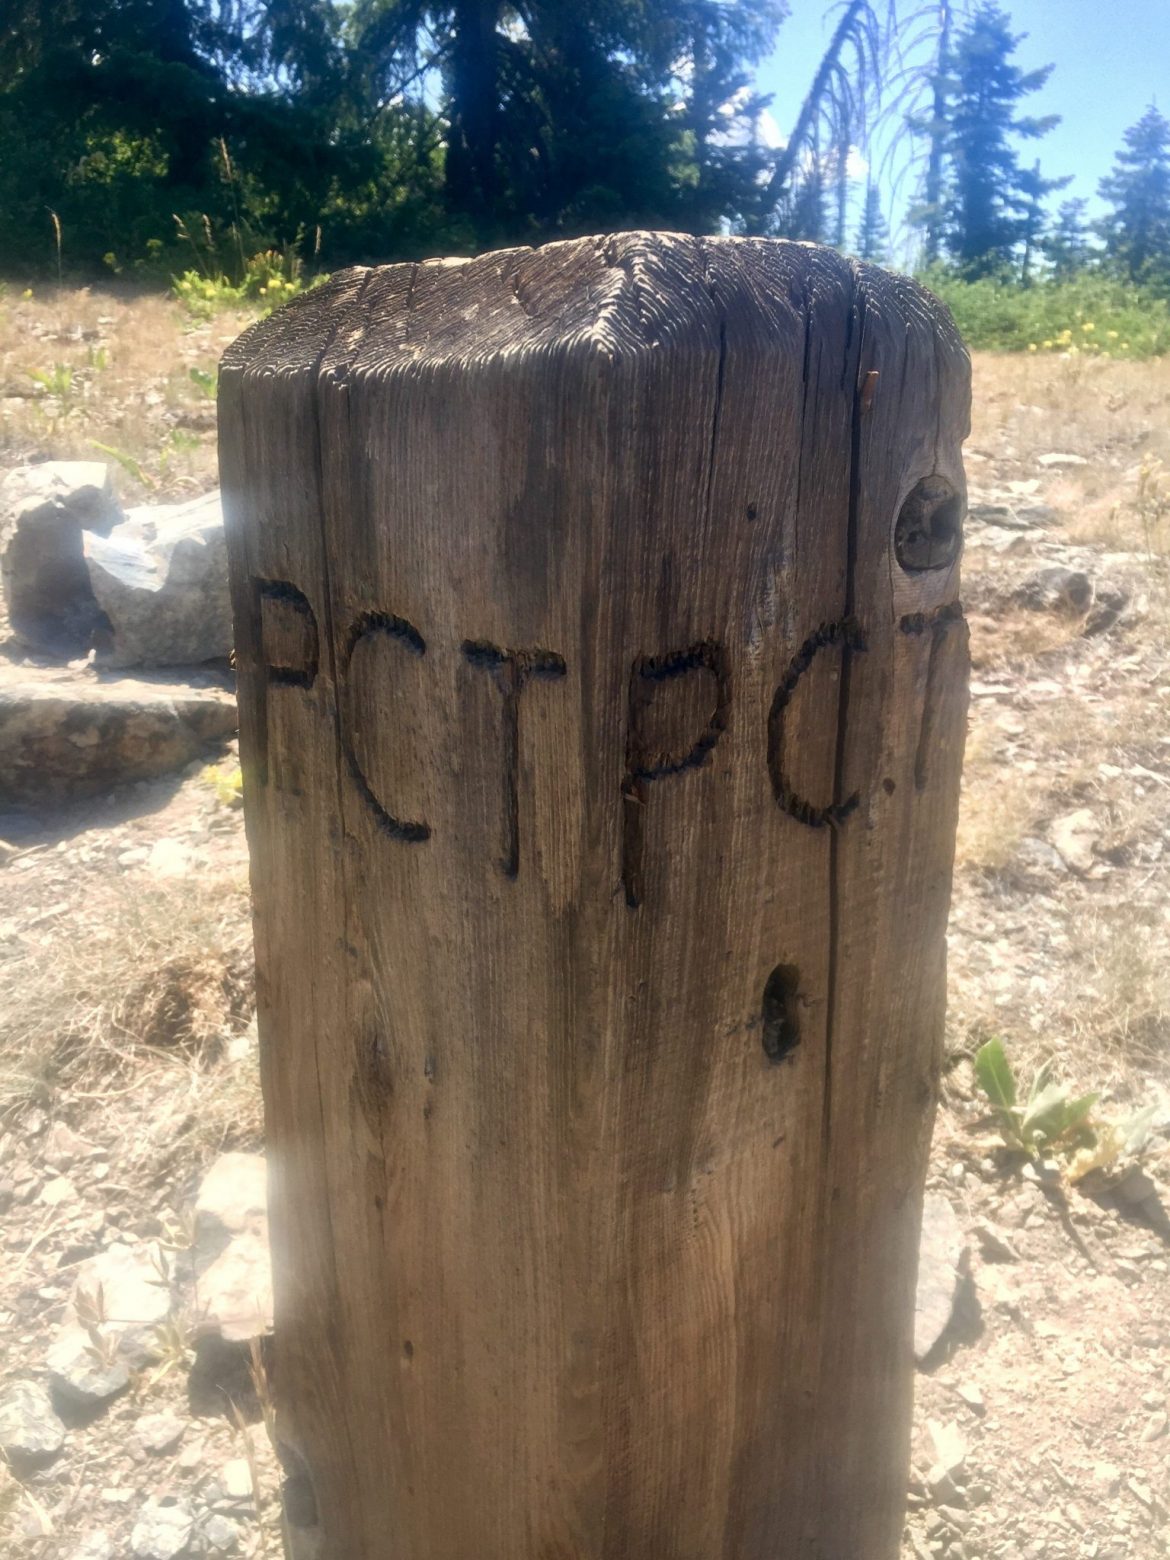 Small wooden post with PCT carved into it